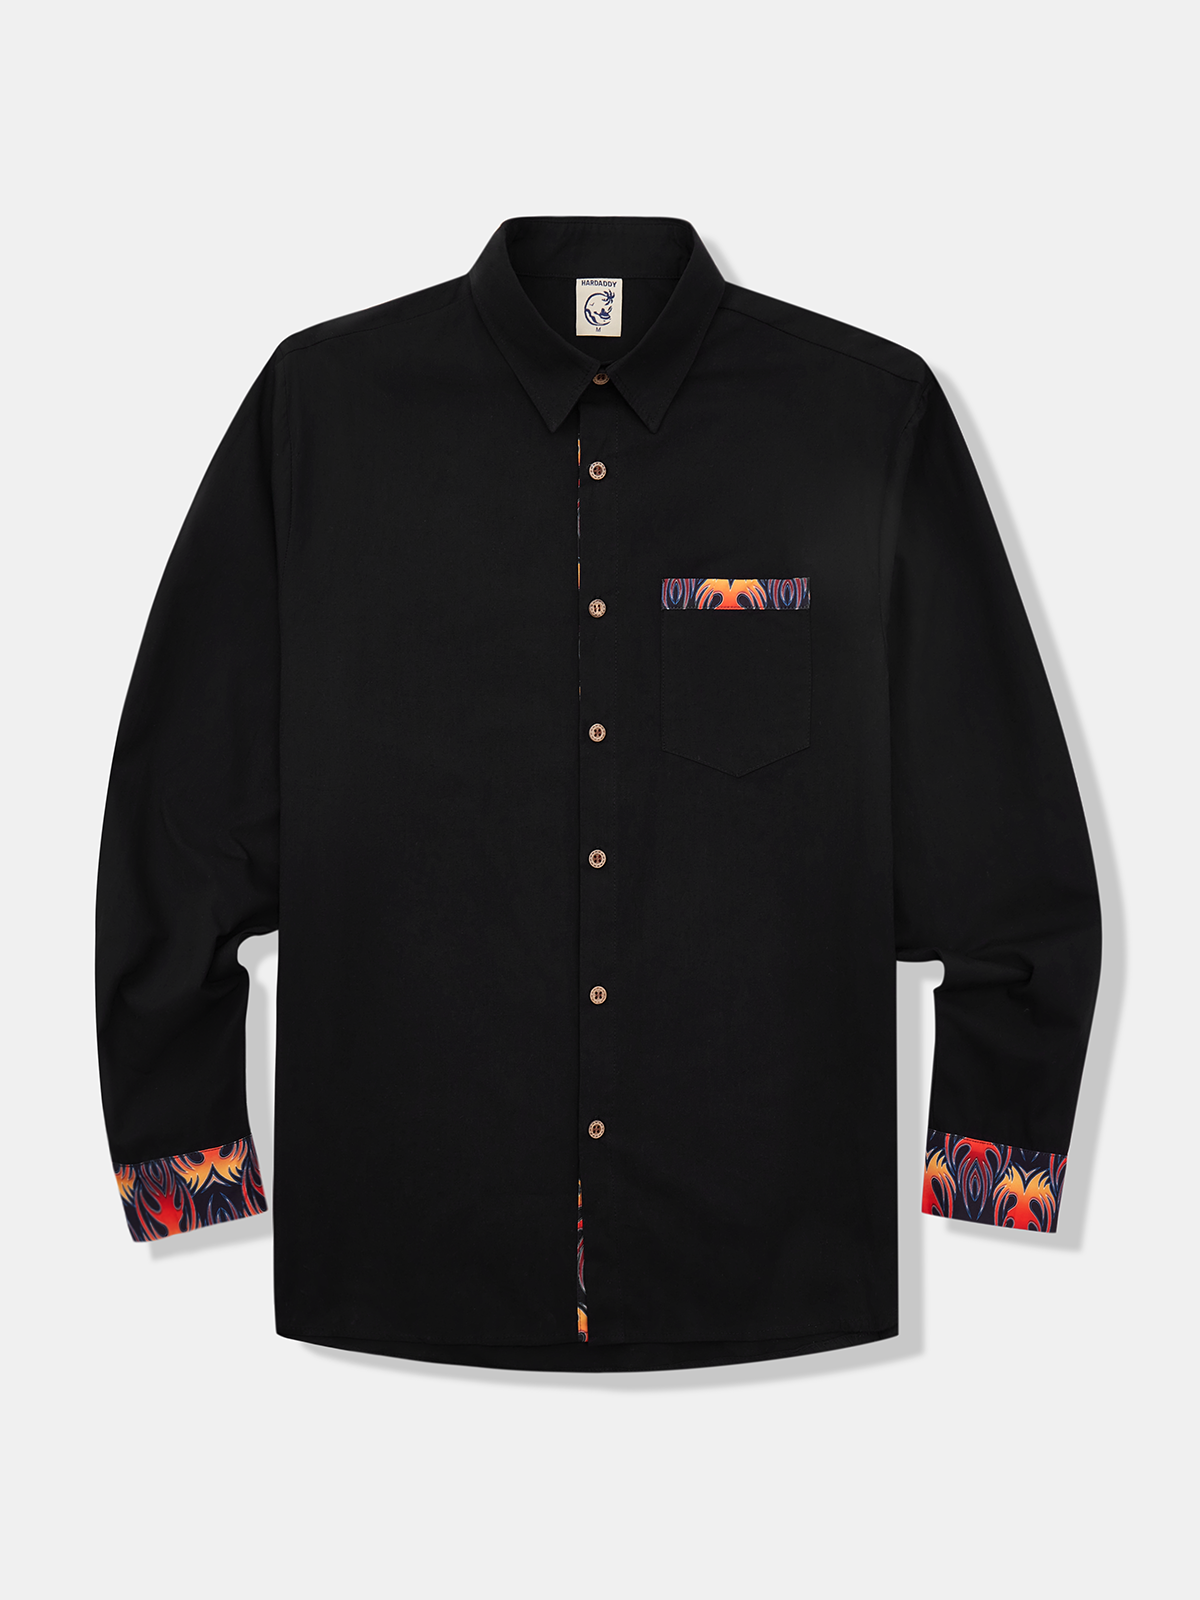 Hardaddy Cotton Patchwork Flame Print Chest Pocket Long Sleeved Shirt